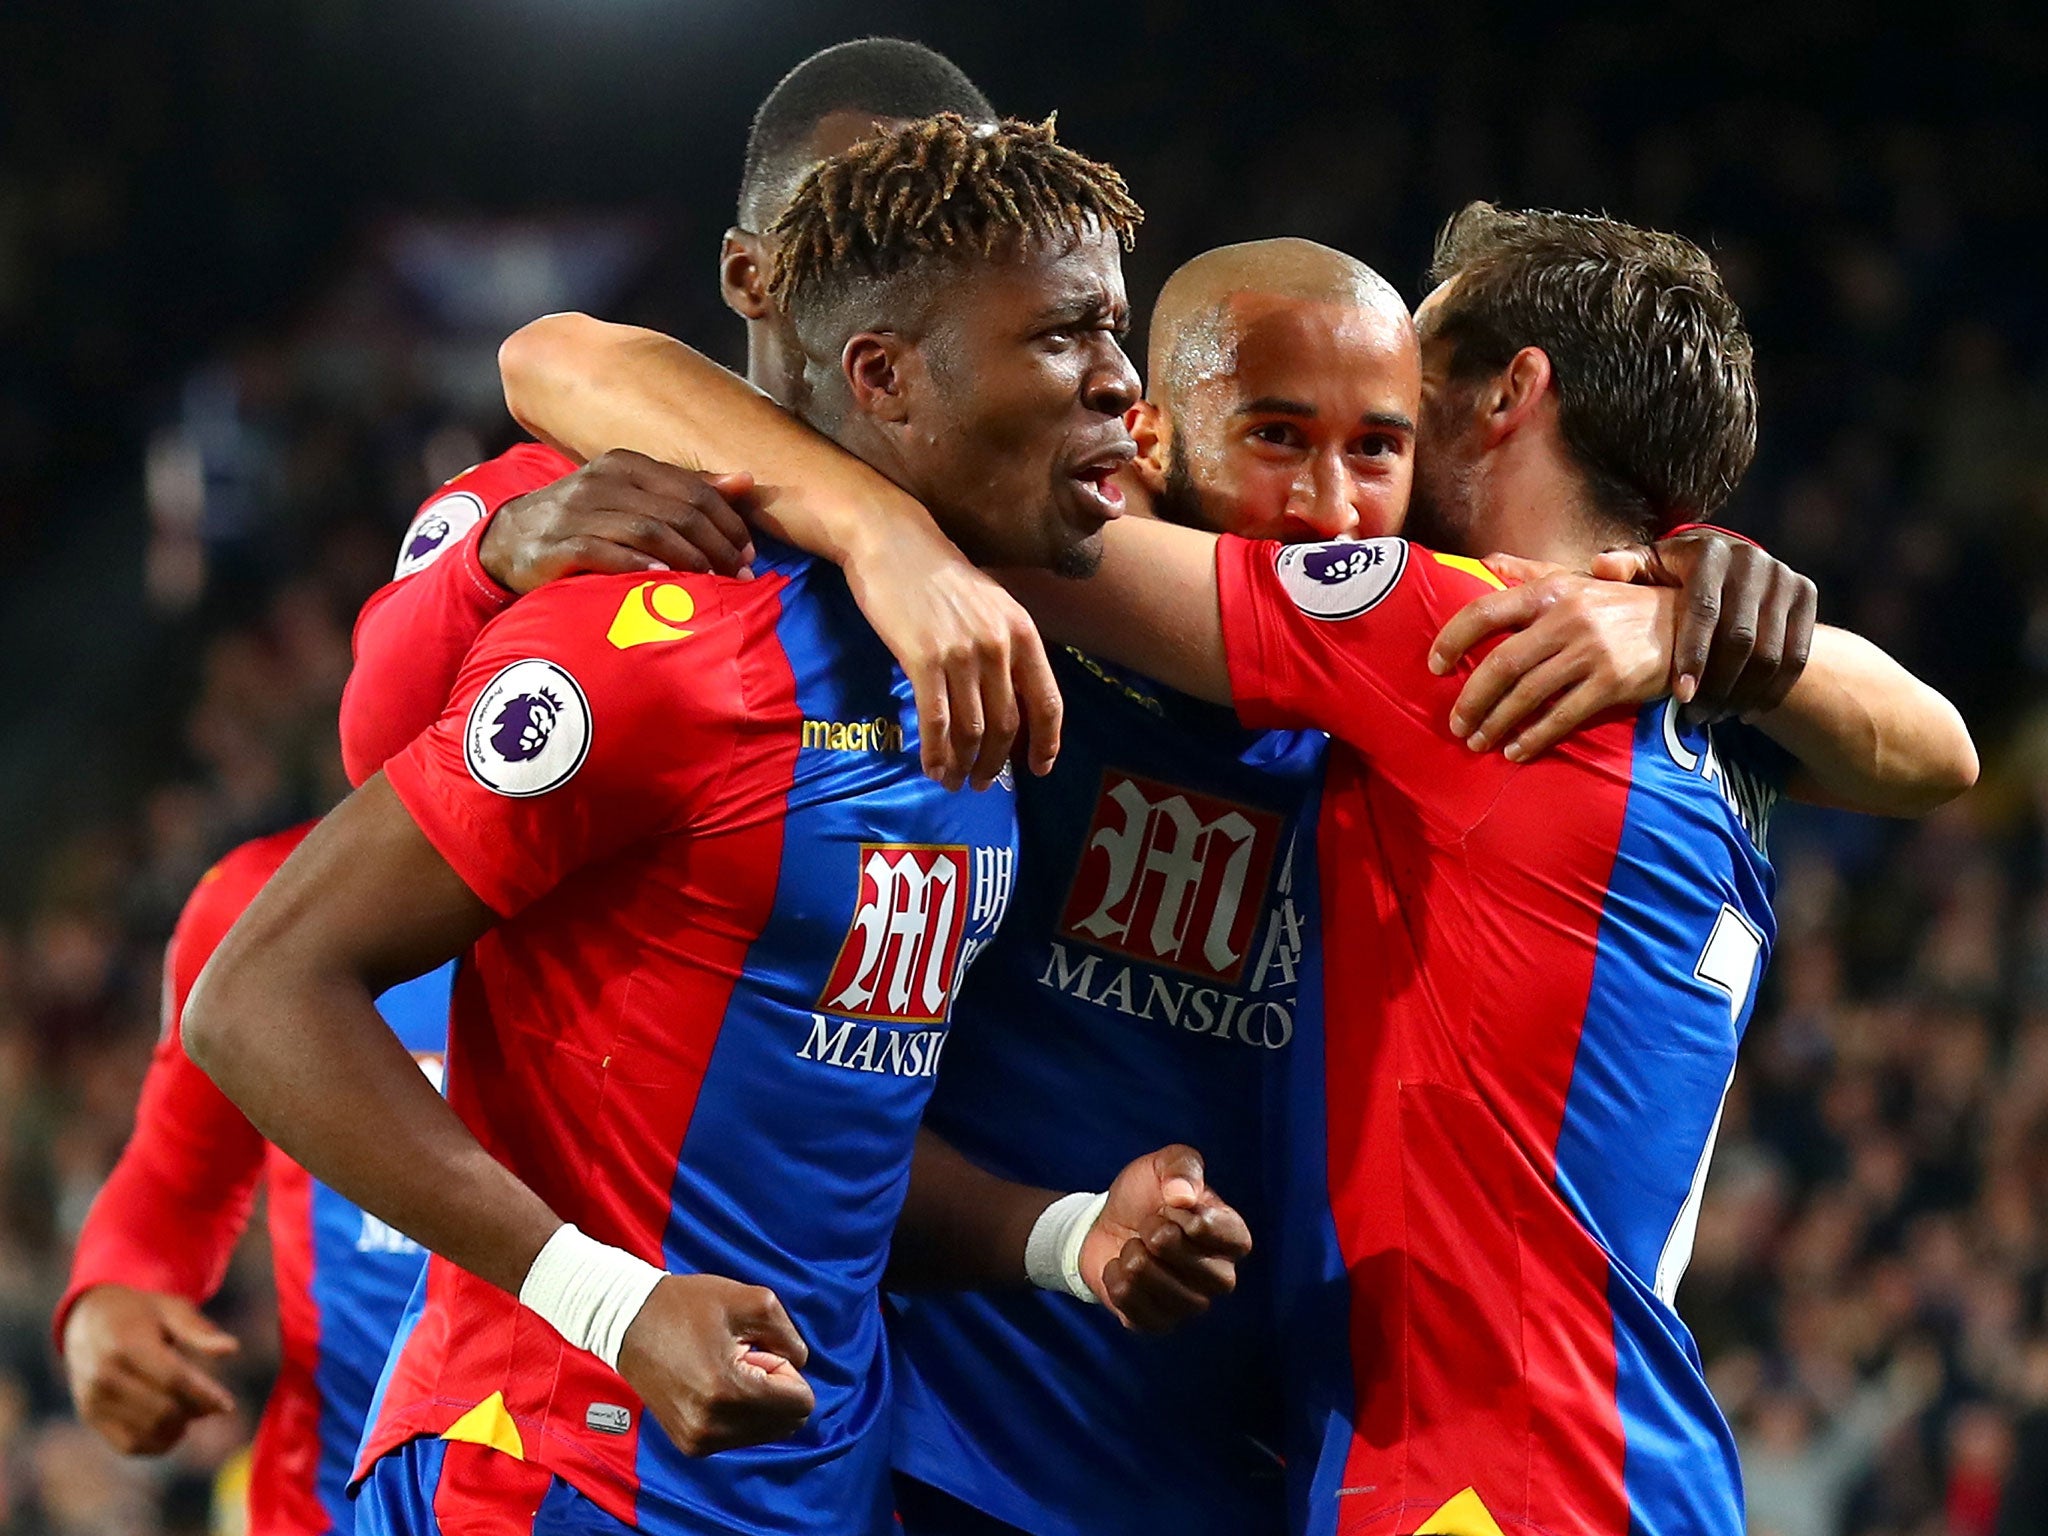 Wilfried Zaha has been in fine form this season